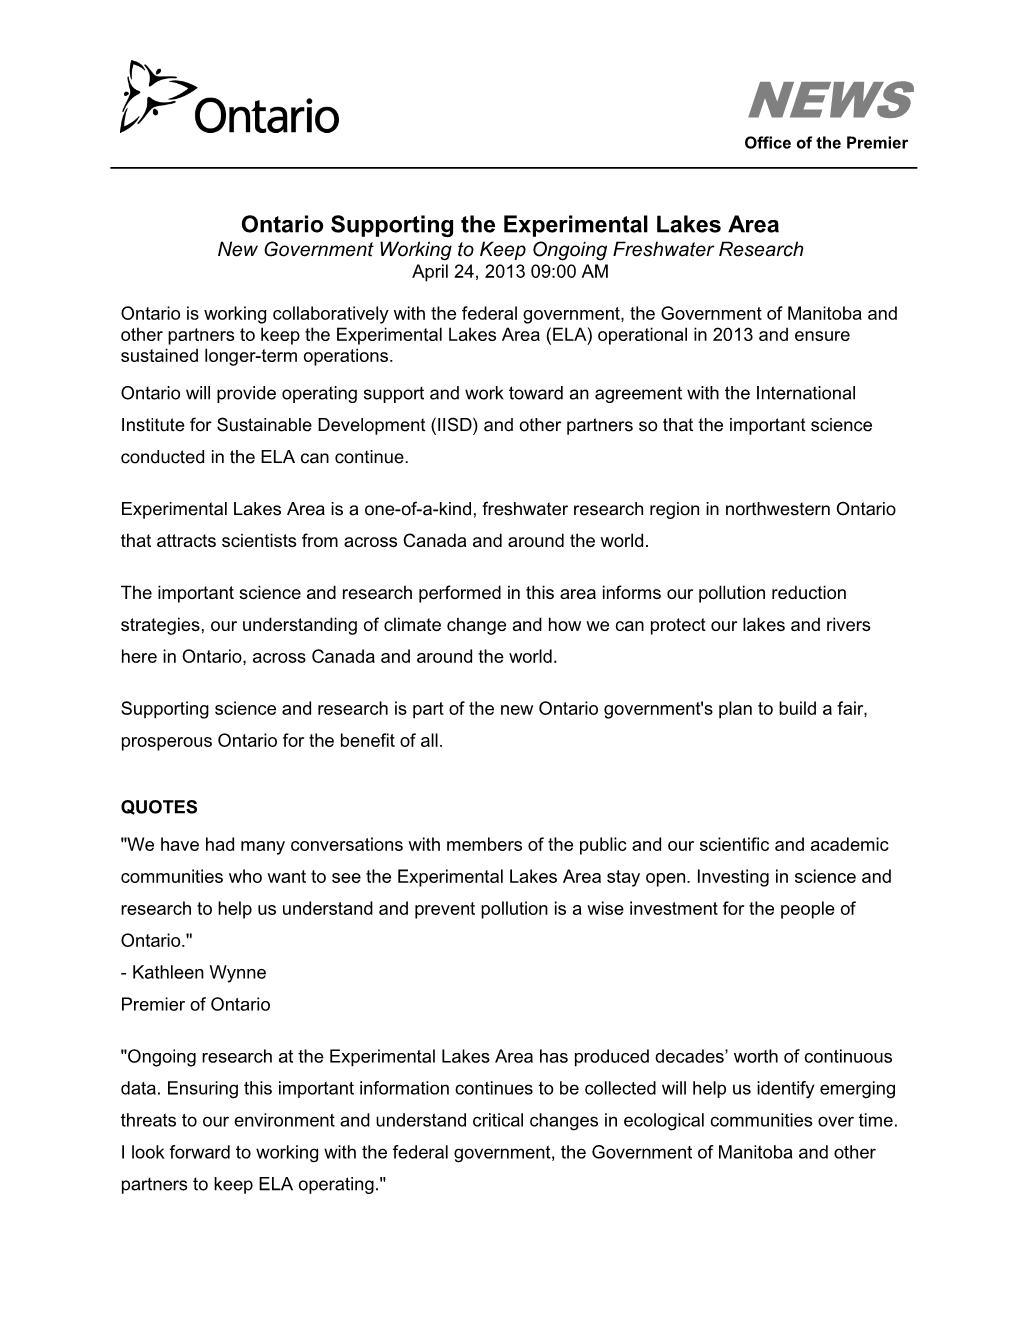 Ontario Supporting the Experimental Lakes Area New Government Working to Keep Ongoing Freshwater Research April 24, 2013 09:00 AM